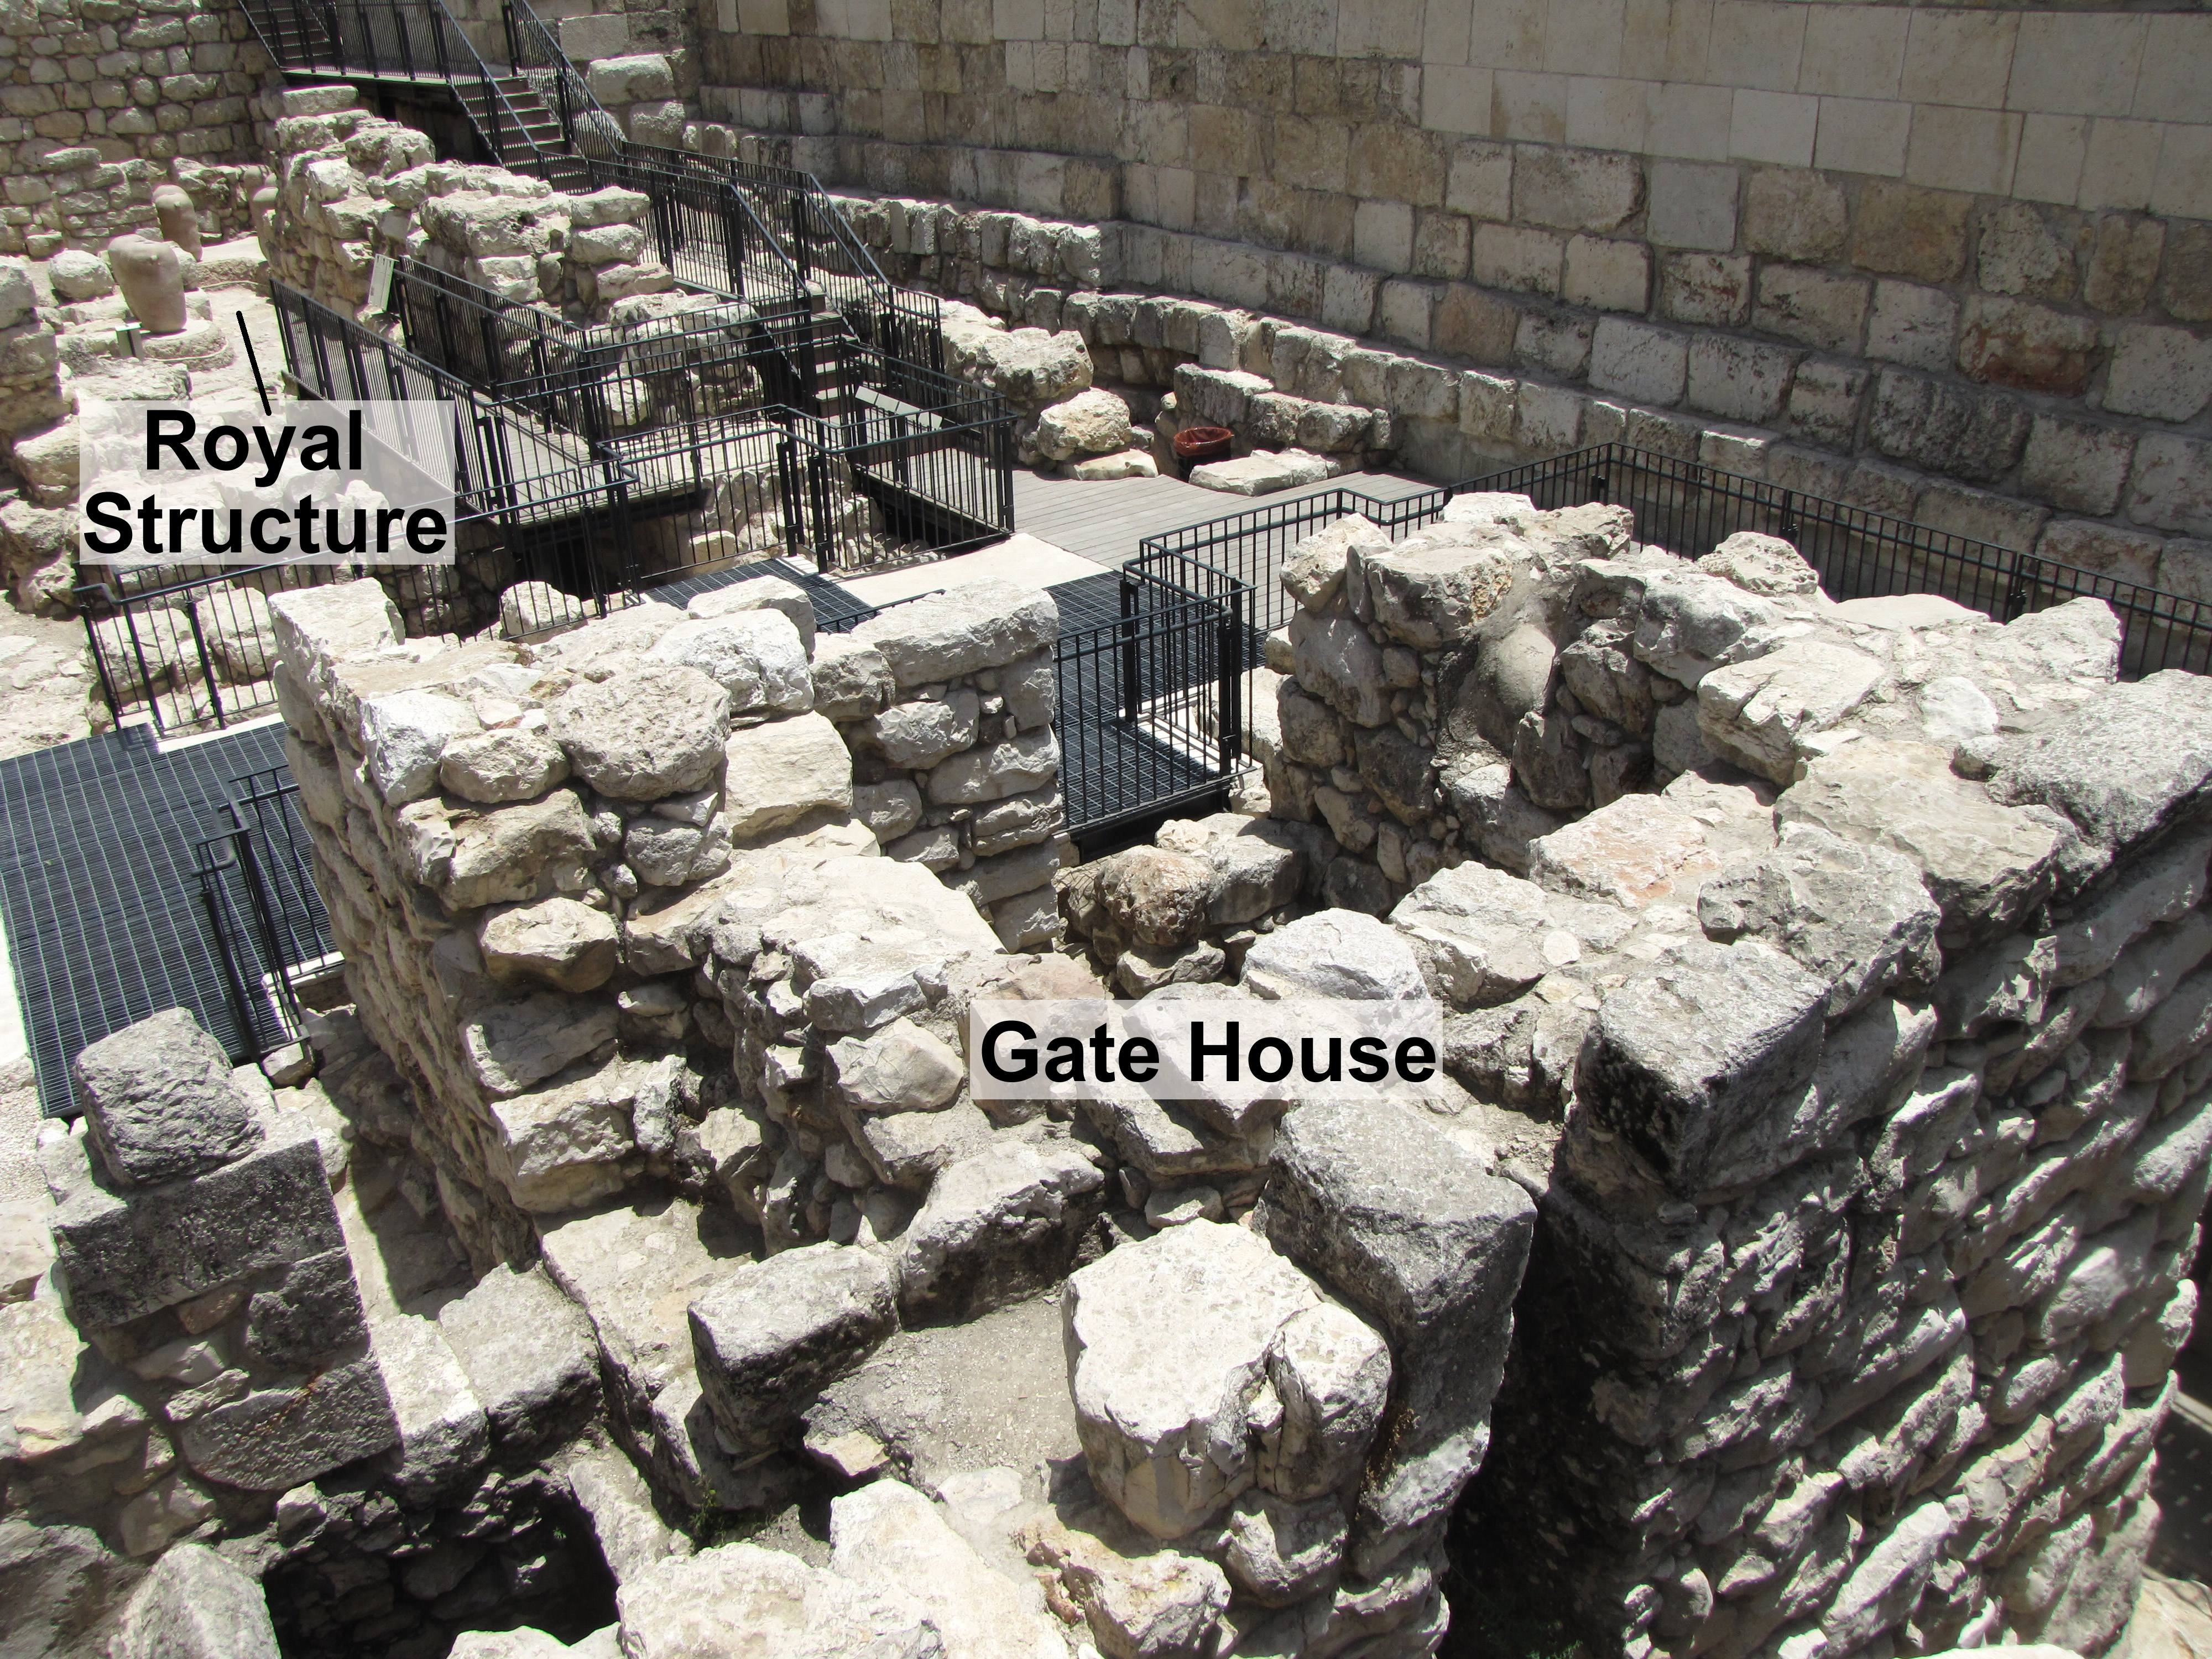 Gate House, Royal Structure, Solomon's Wall and Gate, Ophel, Jerusalem, four-chamber gate system, water chamber